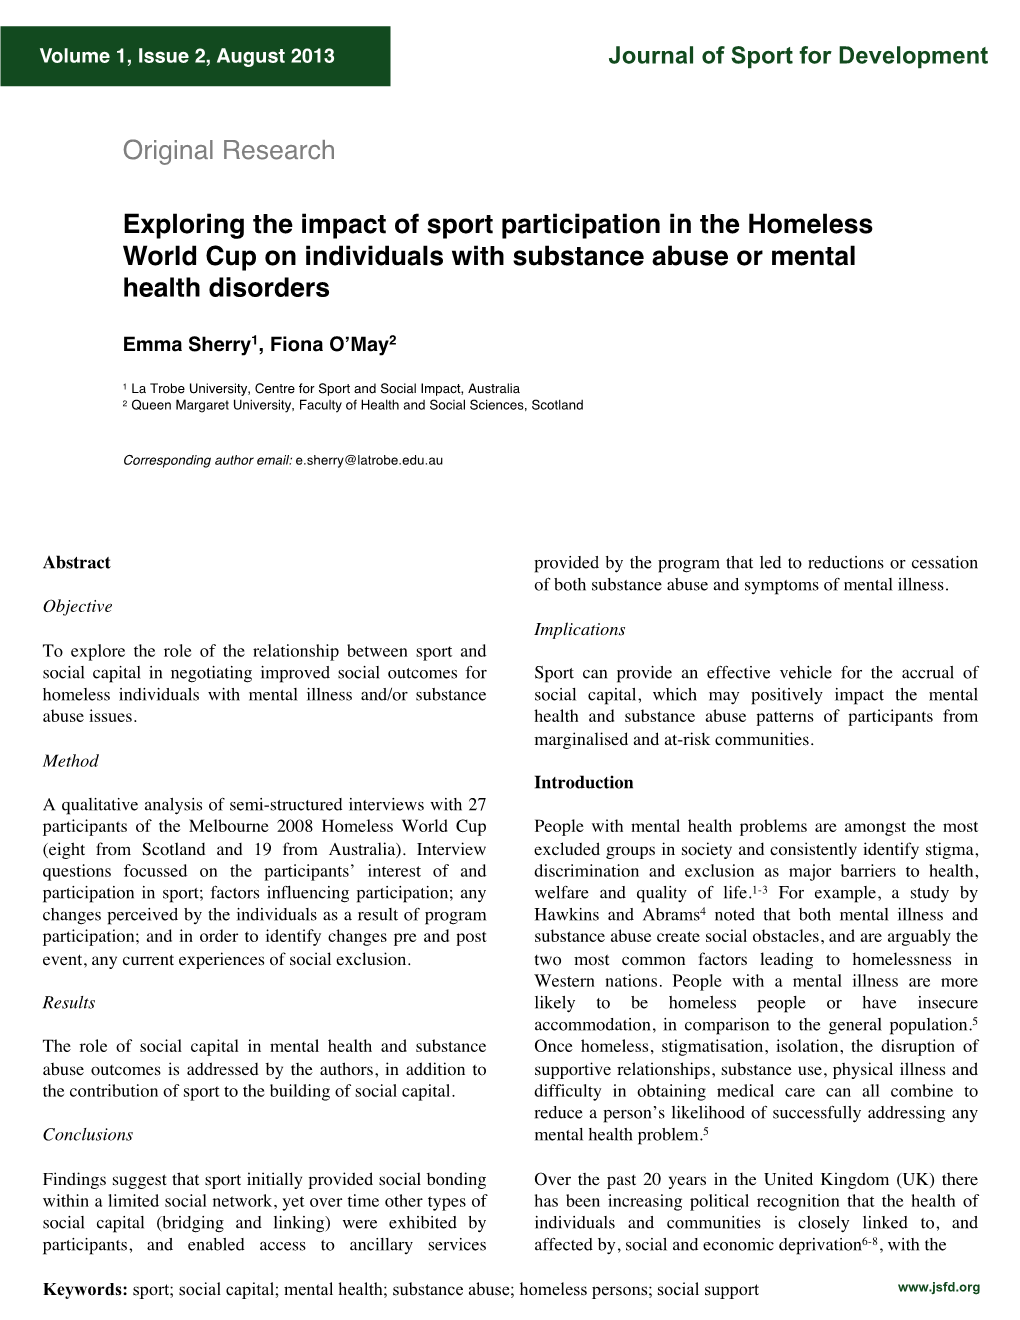 Exploring the Impact of Sport Participation in the Homeless World Cup on Individuals with Substance Abuse Or Mental Health Disorders